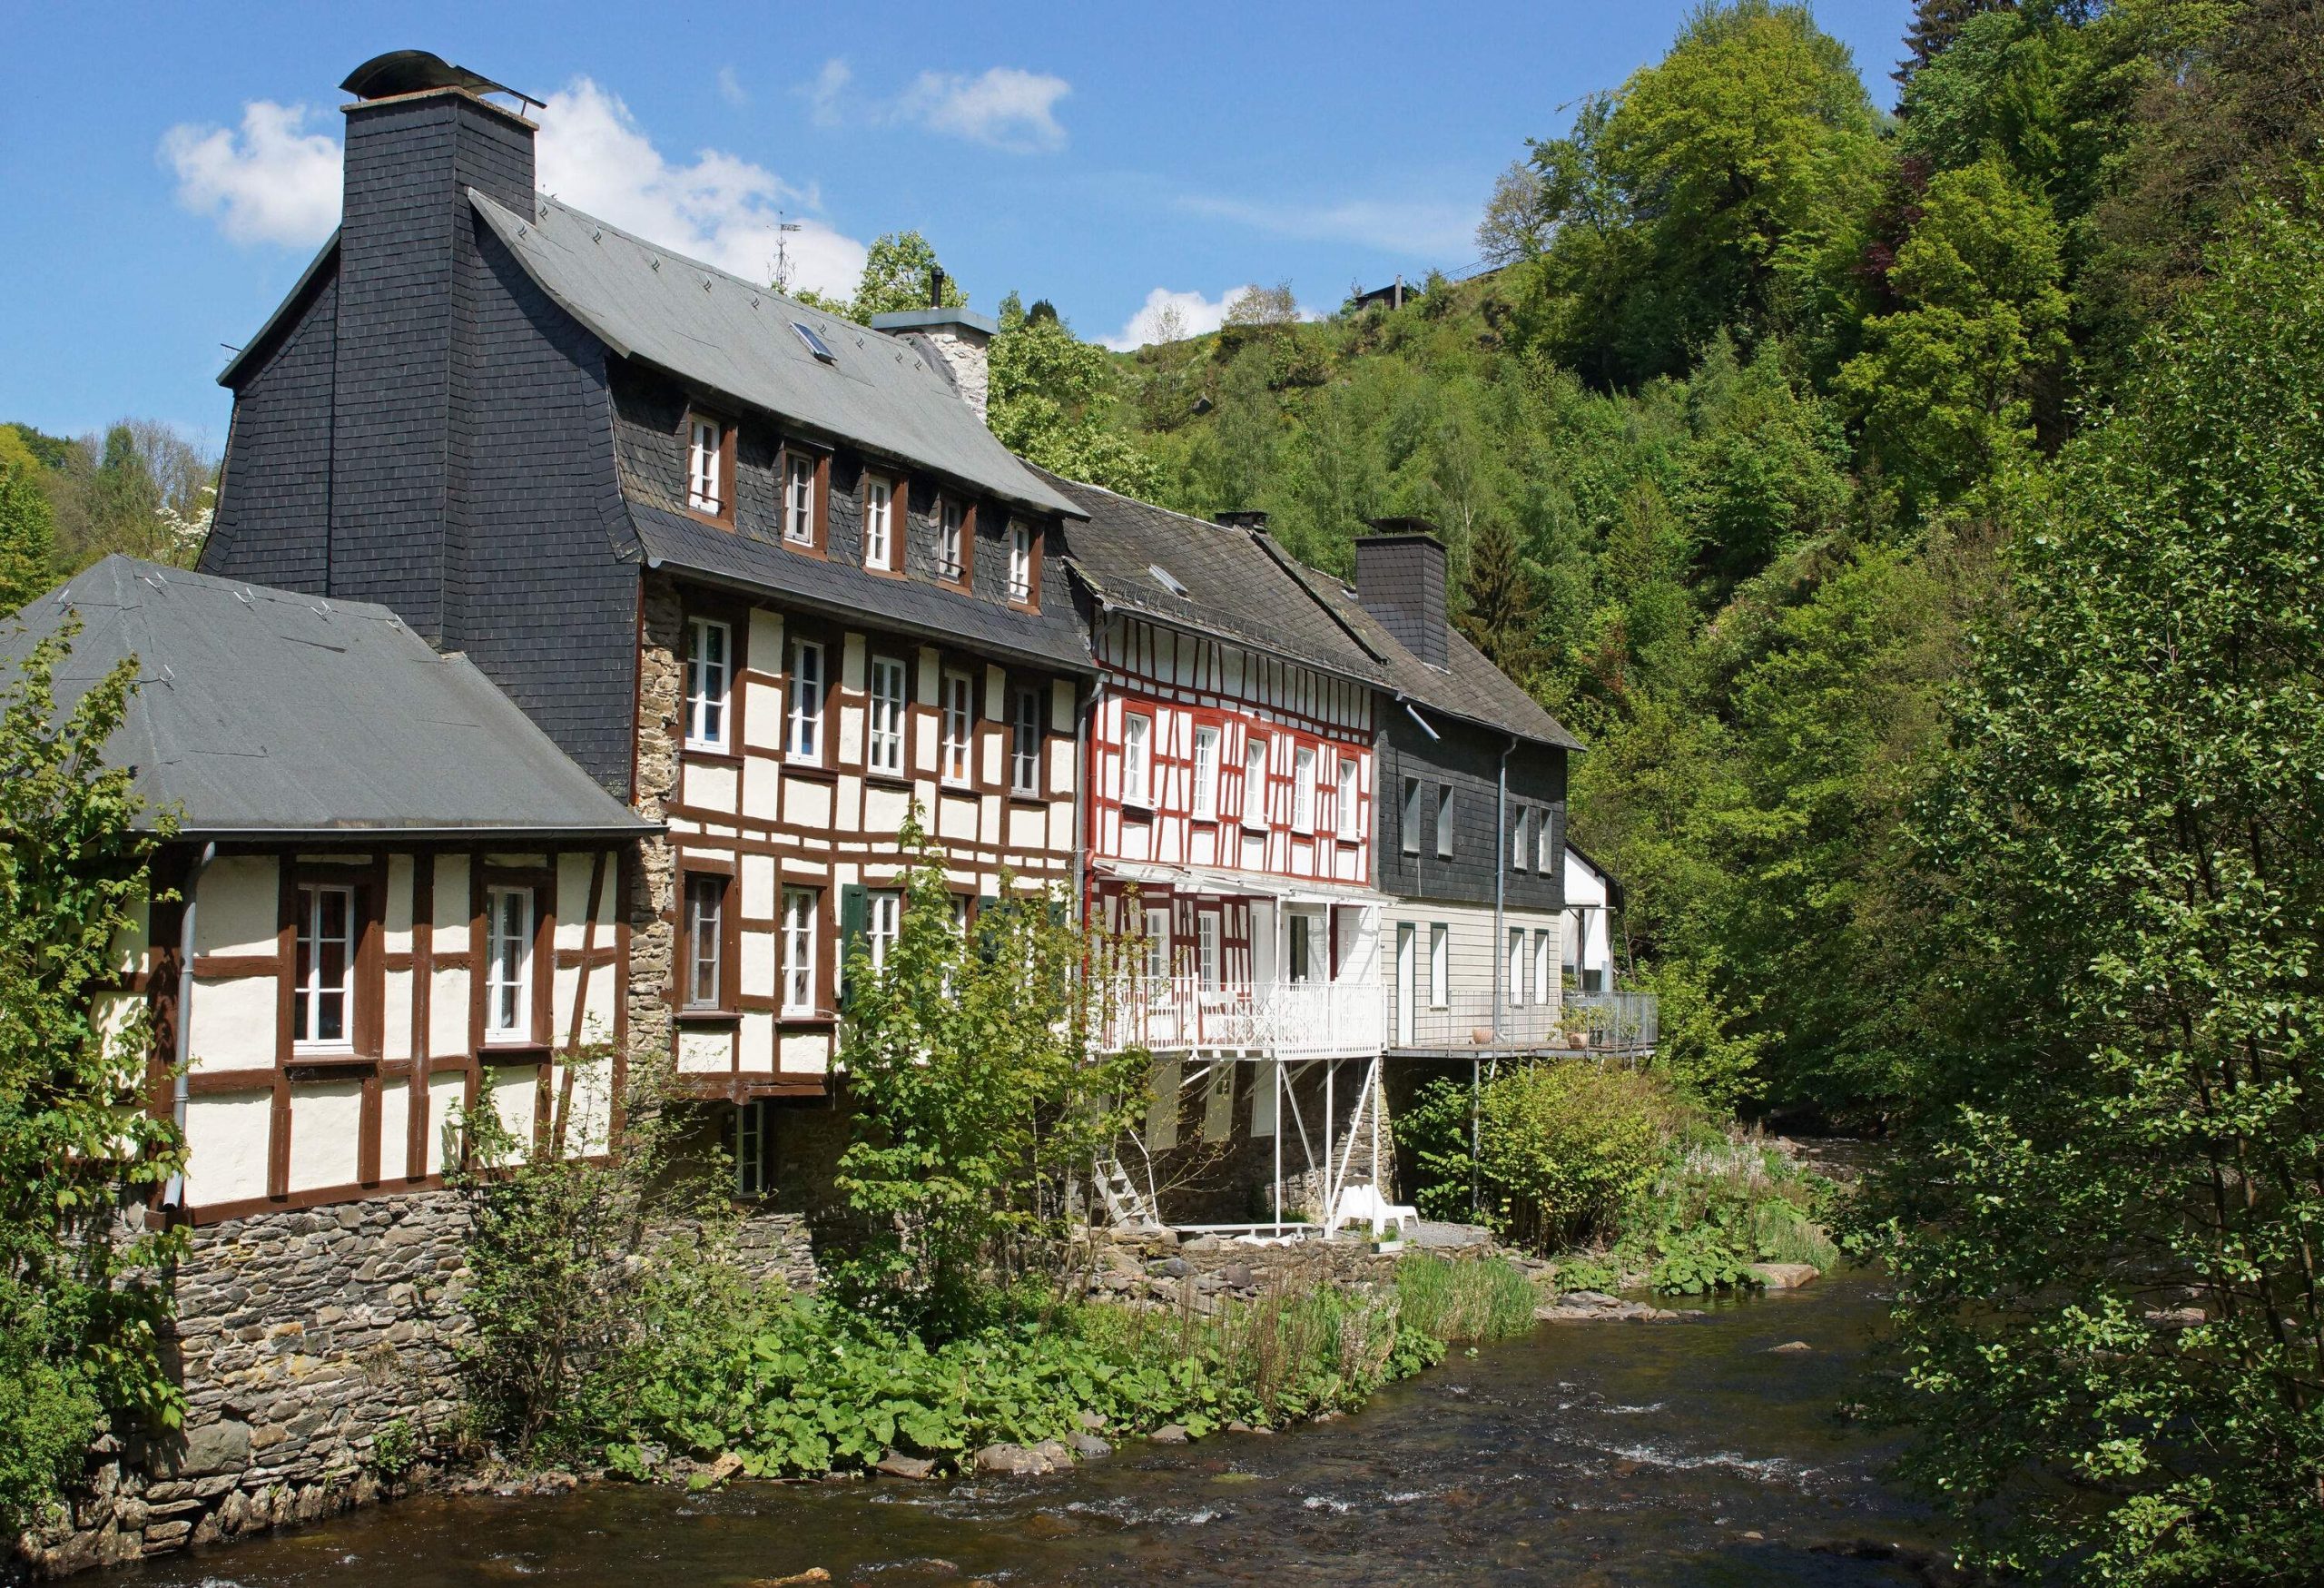 A shallow river flowing alongside timber-framed houses surrounded by trees.